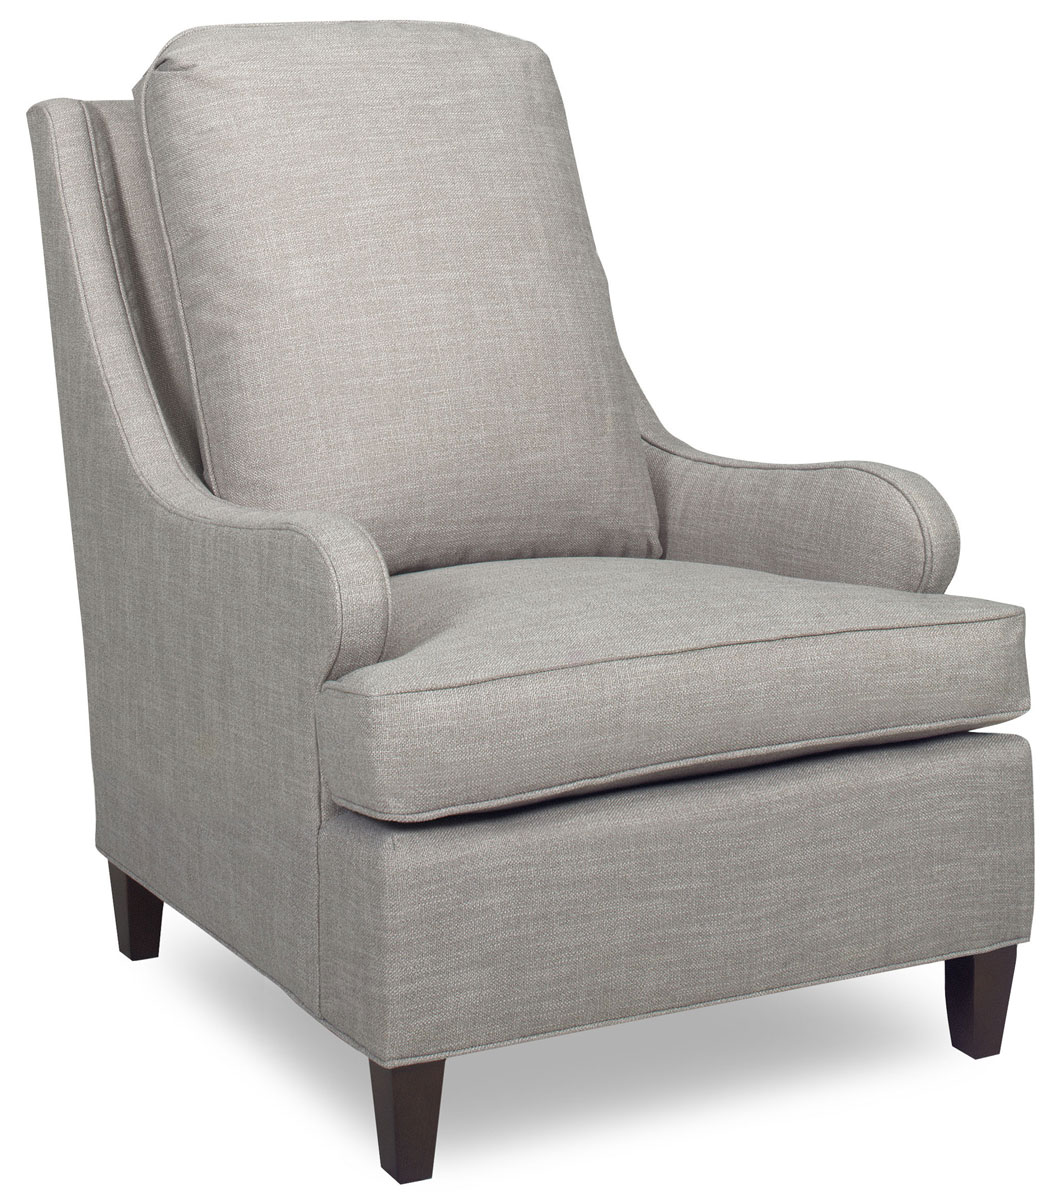 Parker Southern Chasity 3016-KL-C Knuckle Arm Chair 